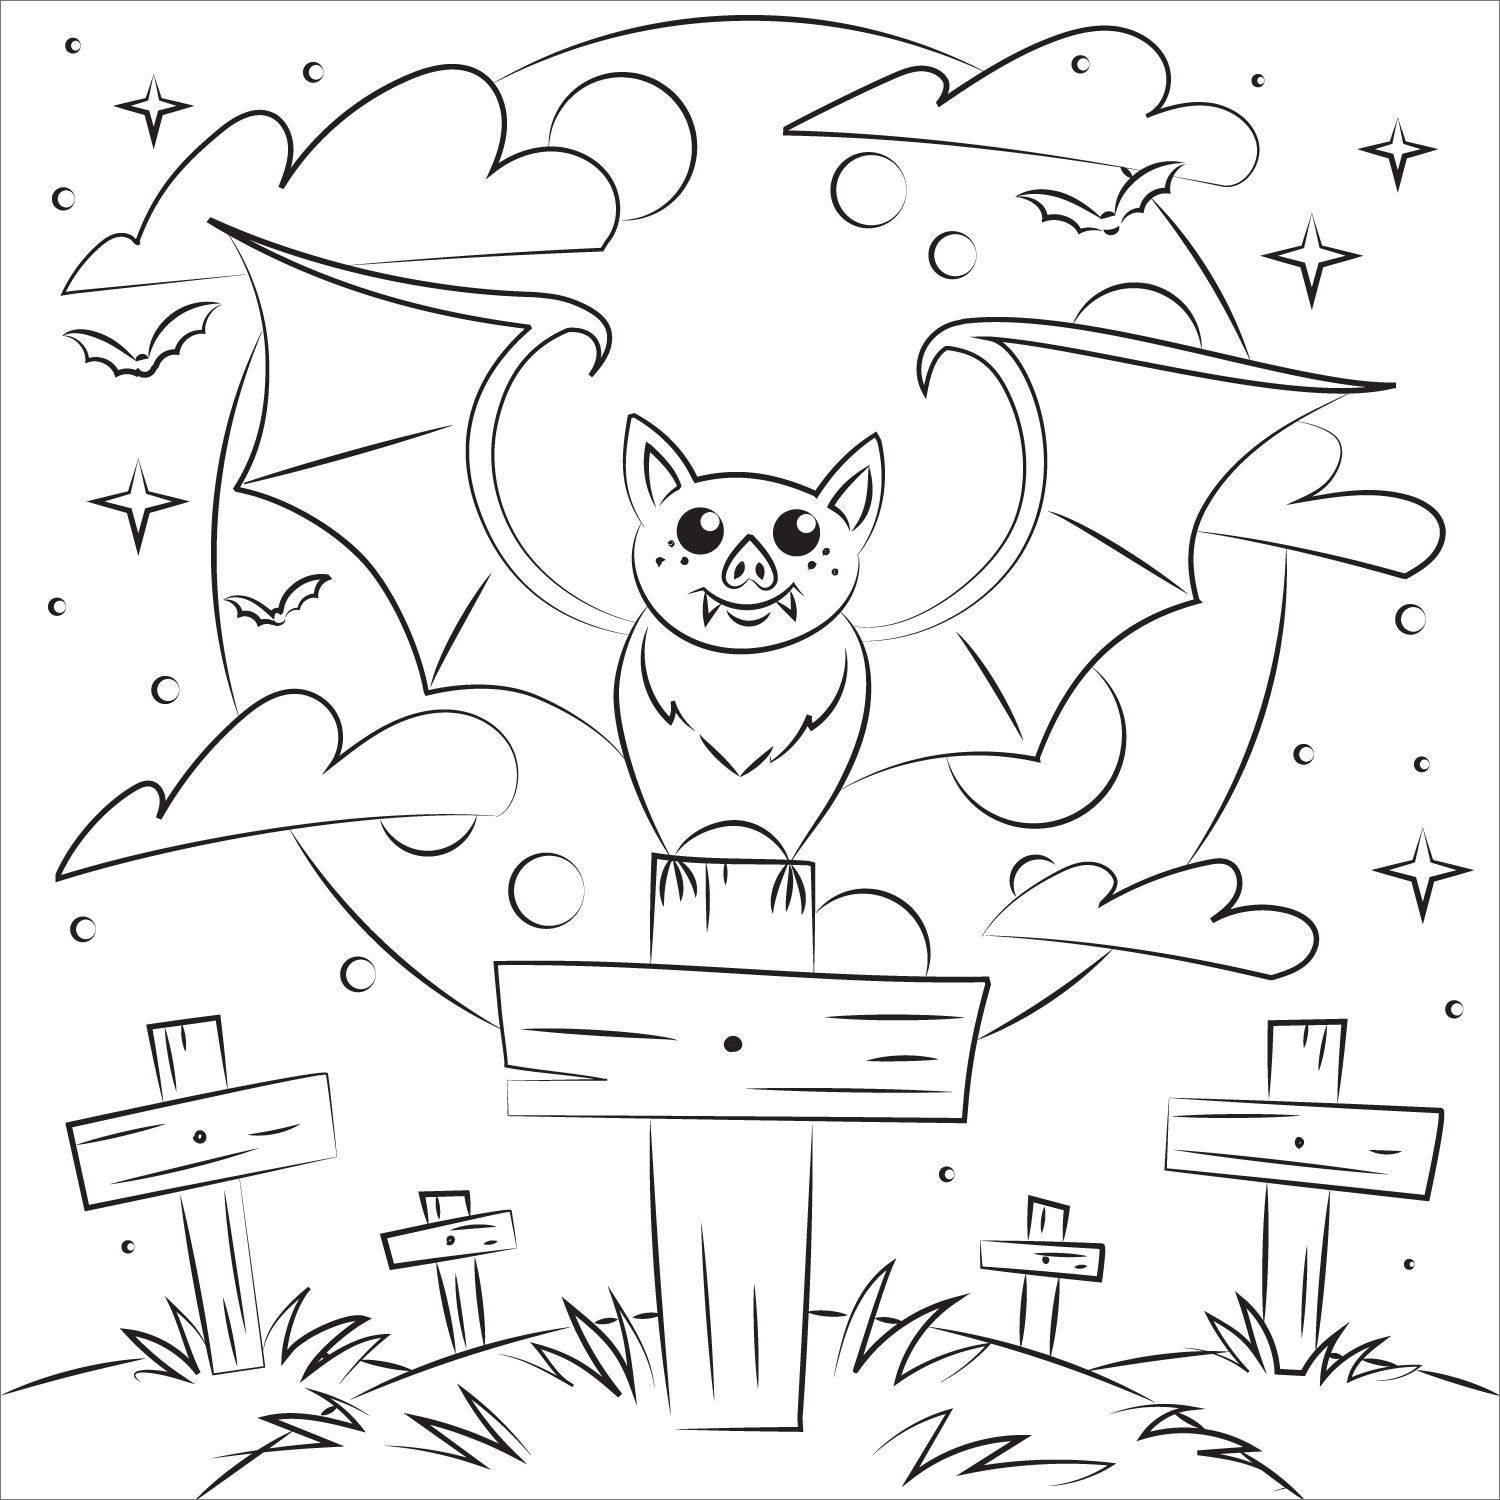 New Halloween Bat For Kids Coloring Page